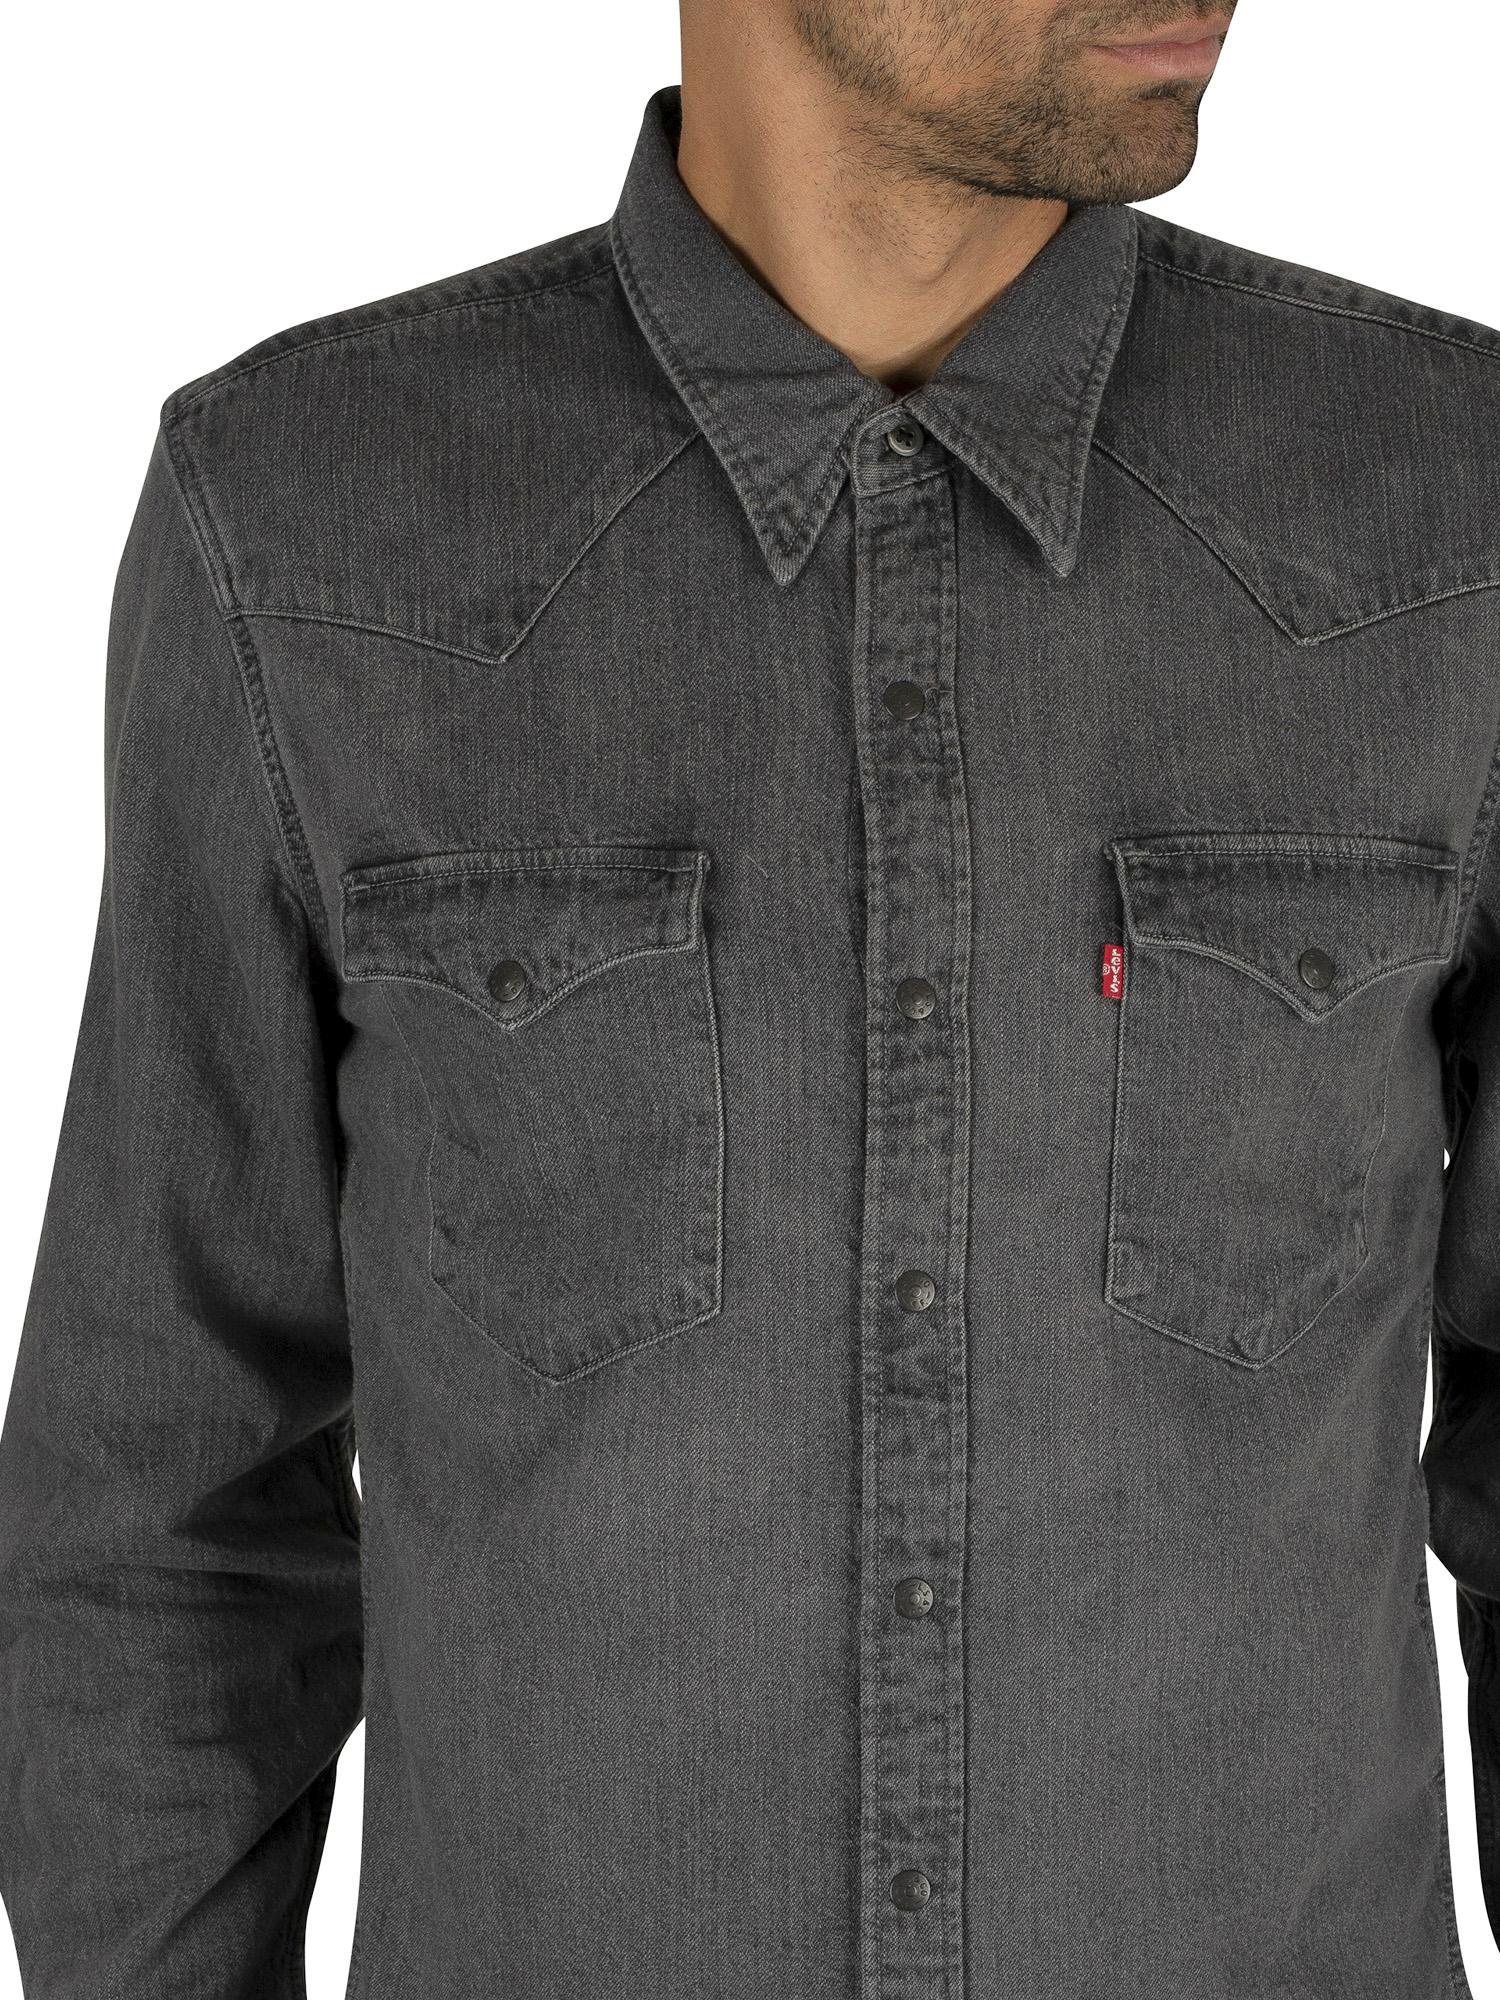 Levi's Cotton Barstow Western Shirt in Black for Men - Lyst